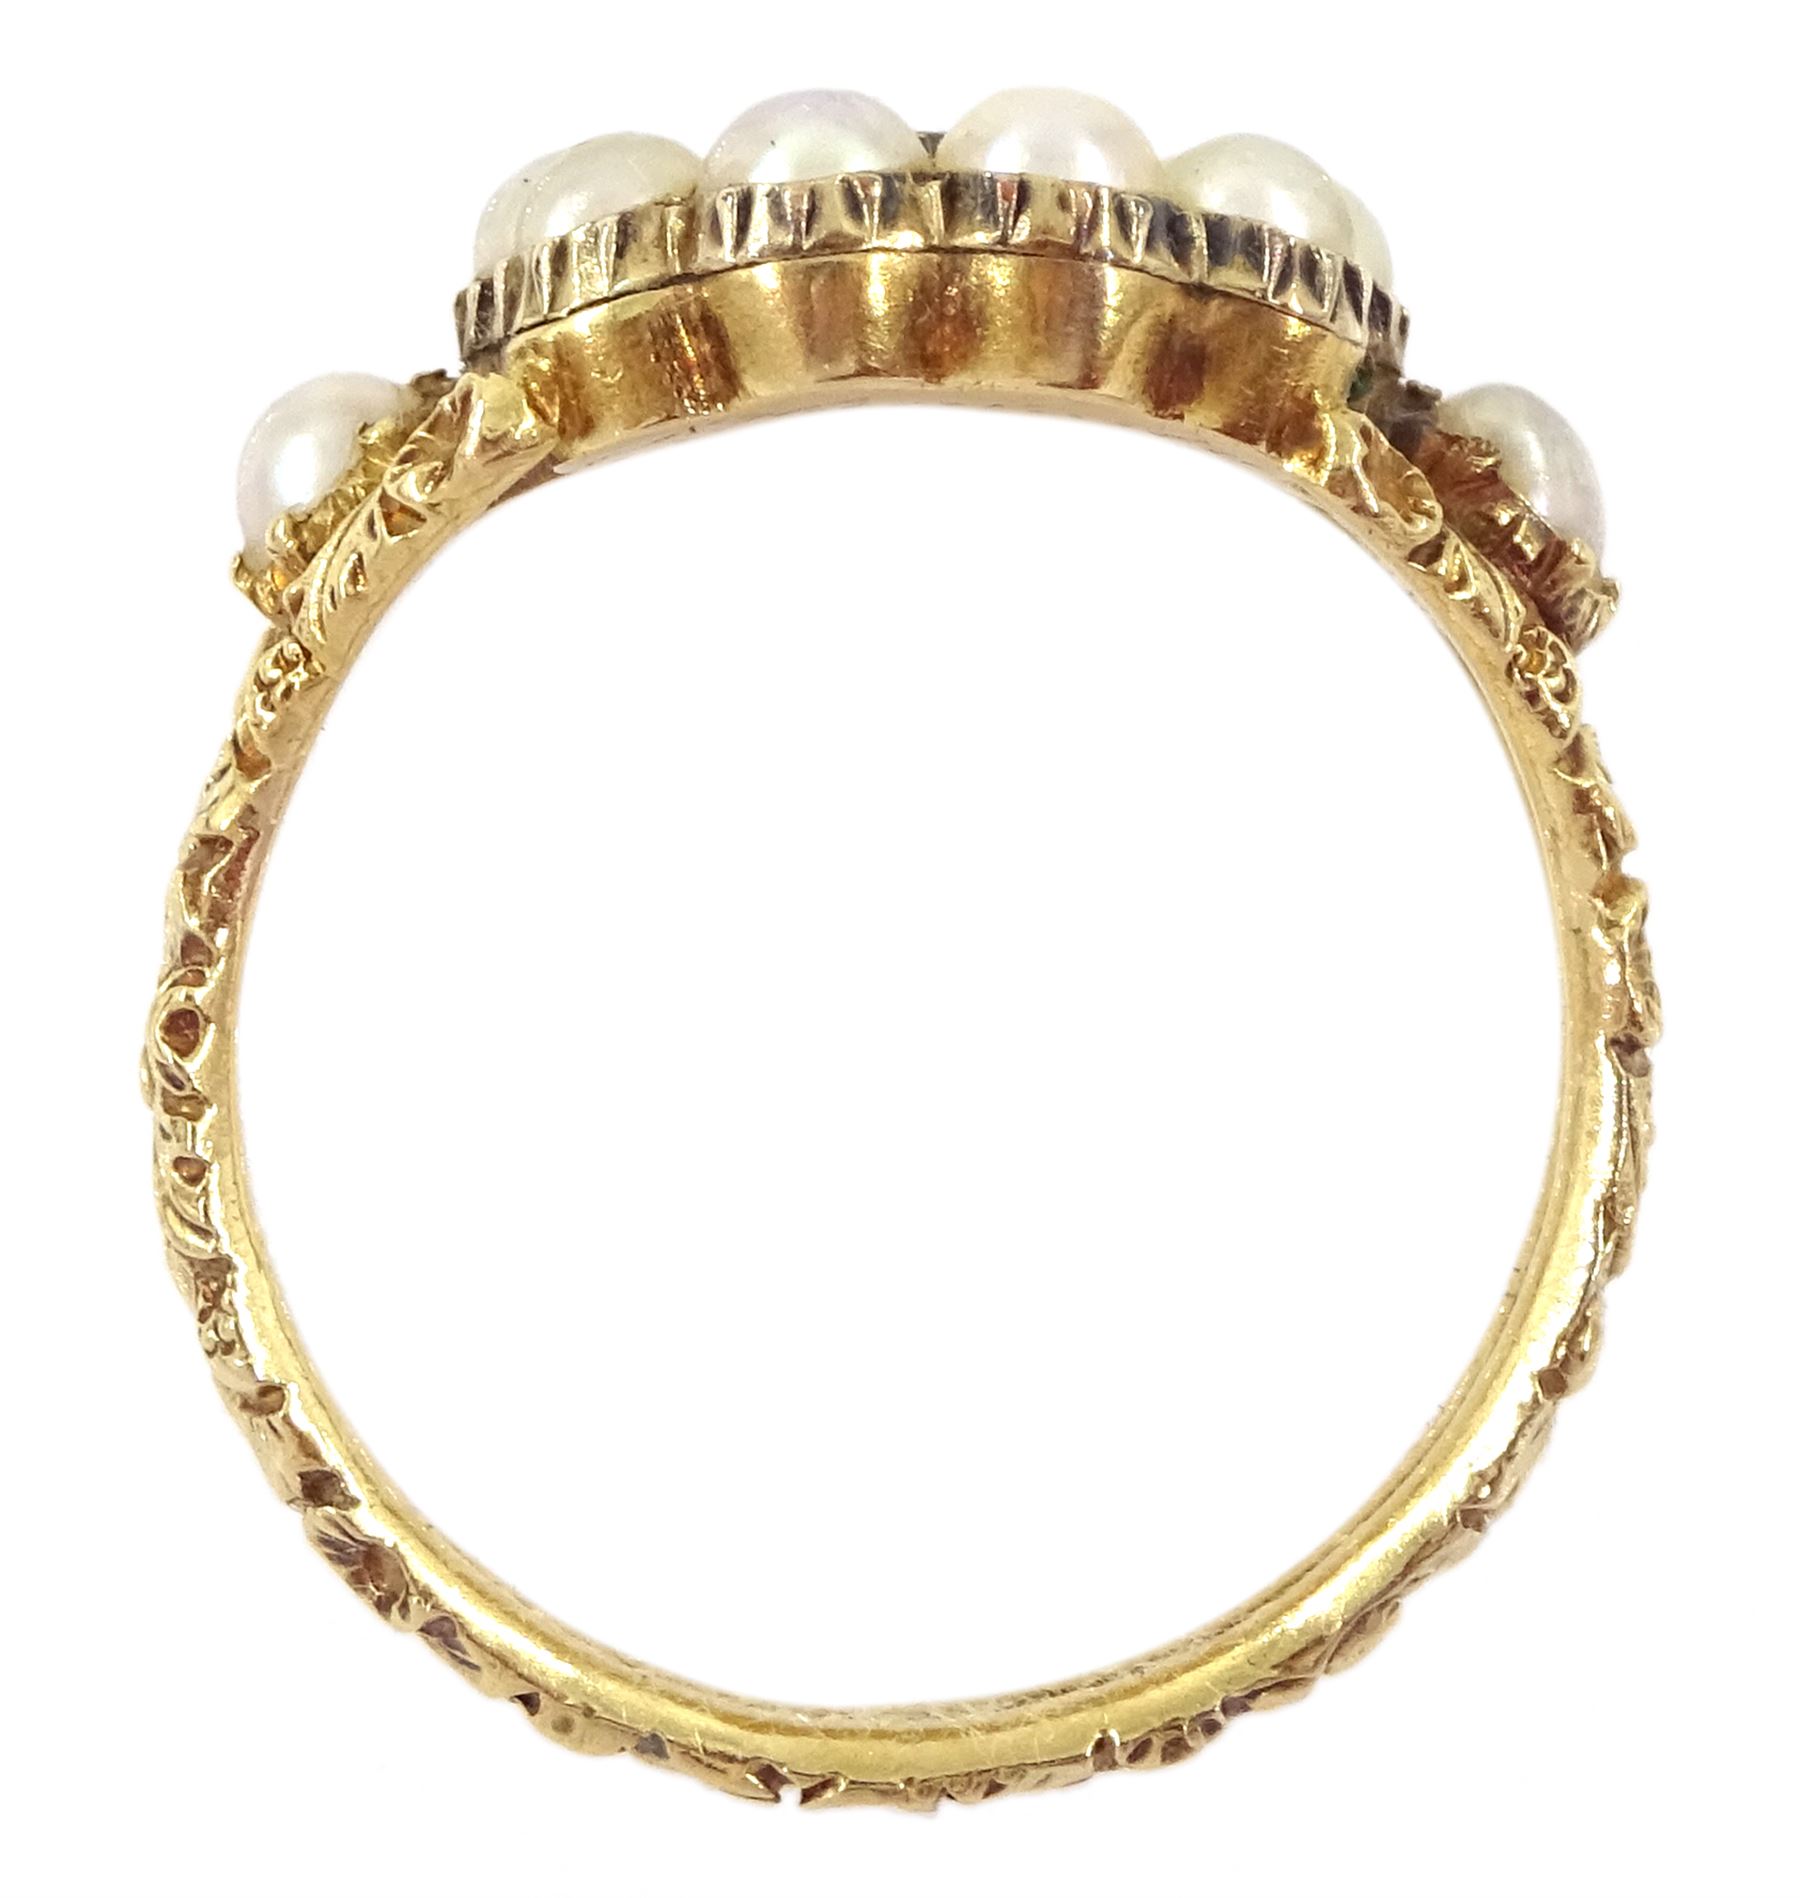 George III gold split pearl mourning ring - Image 5 of 6